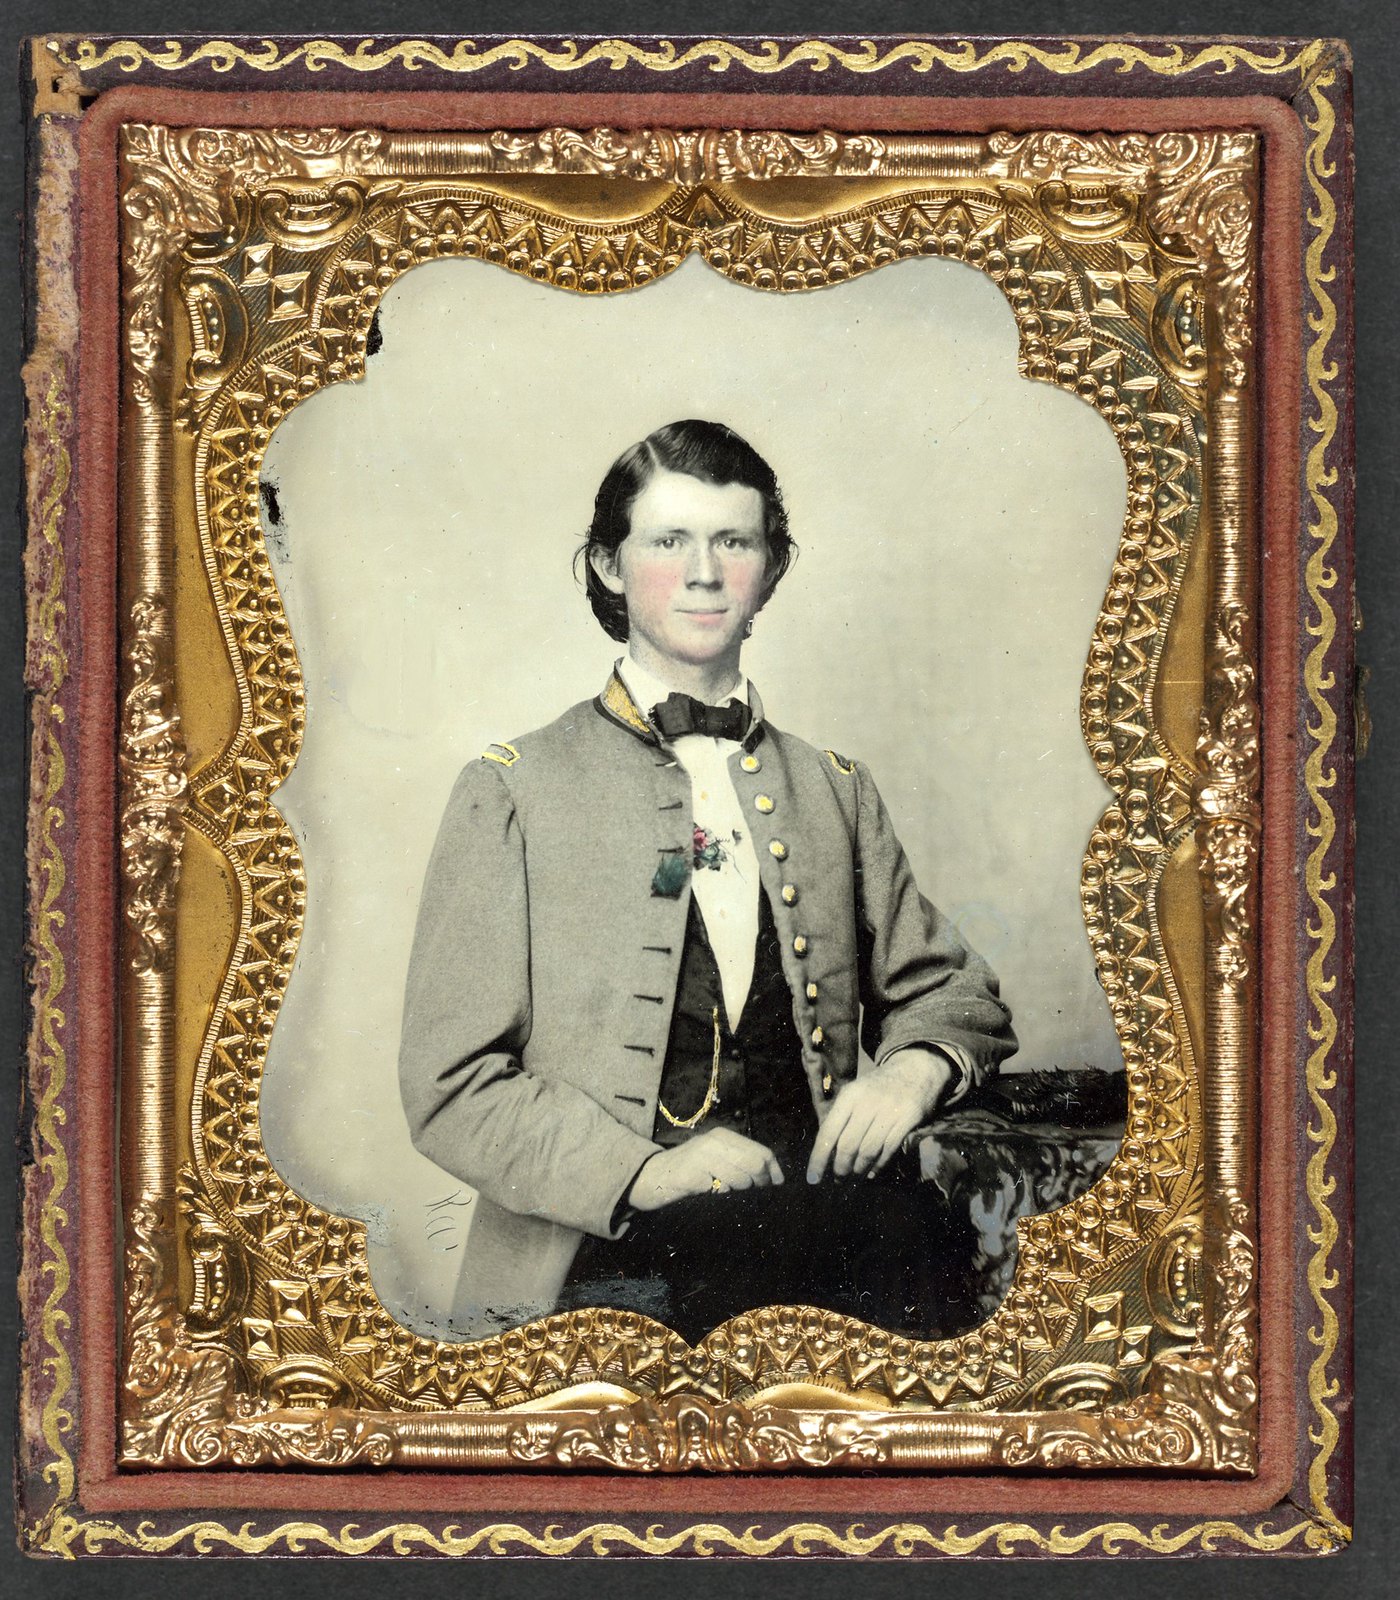 Unidentified soldier in Confederate frock coat with gold trim.